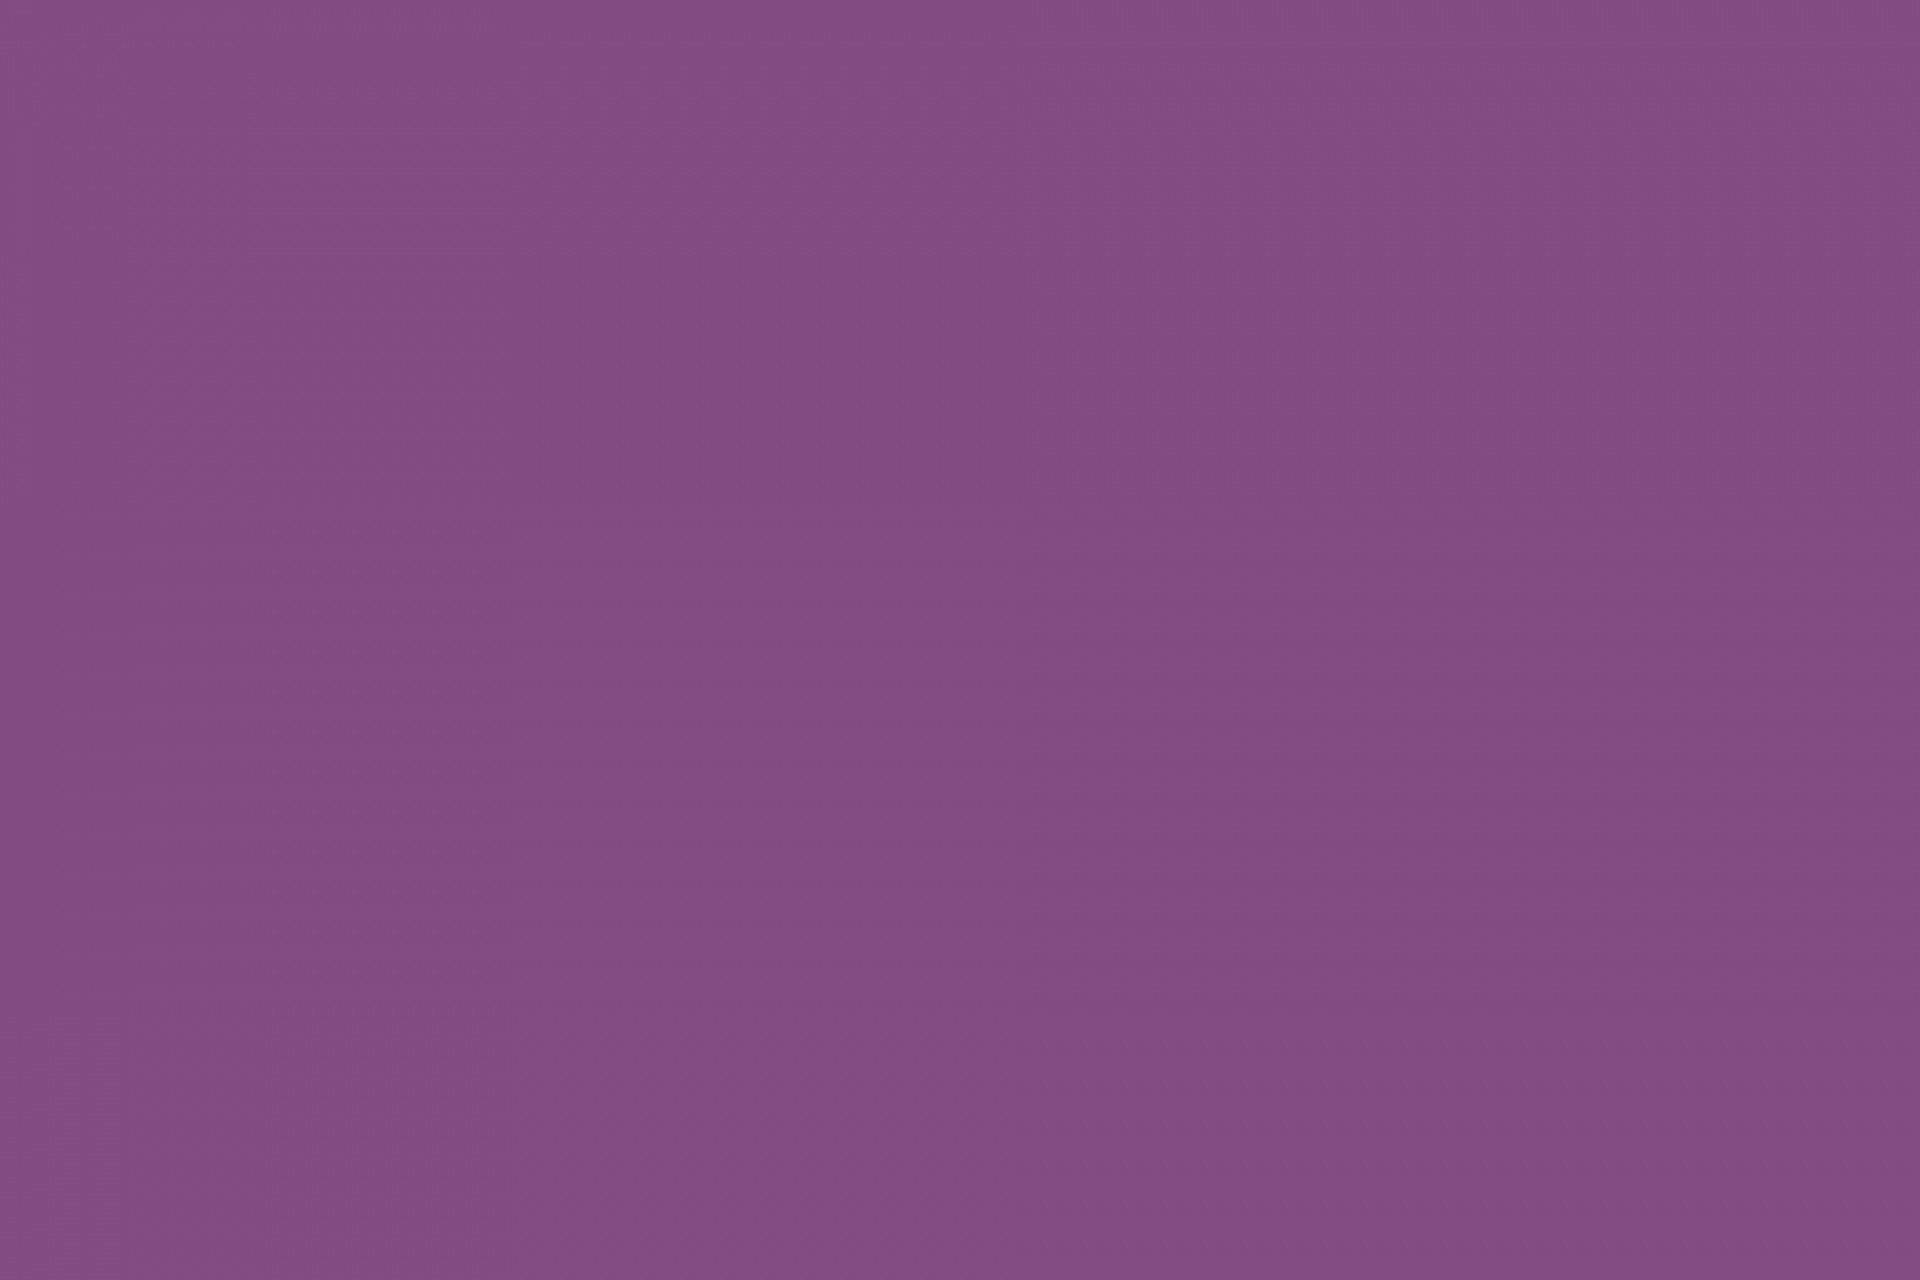 Rectangle Plum Background Light Pictures